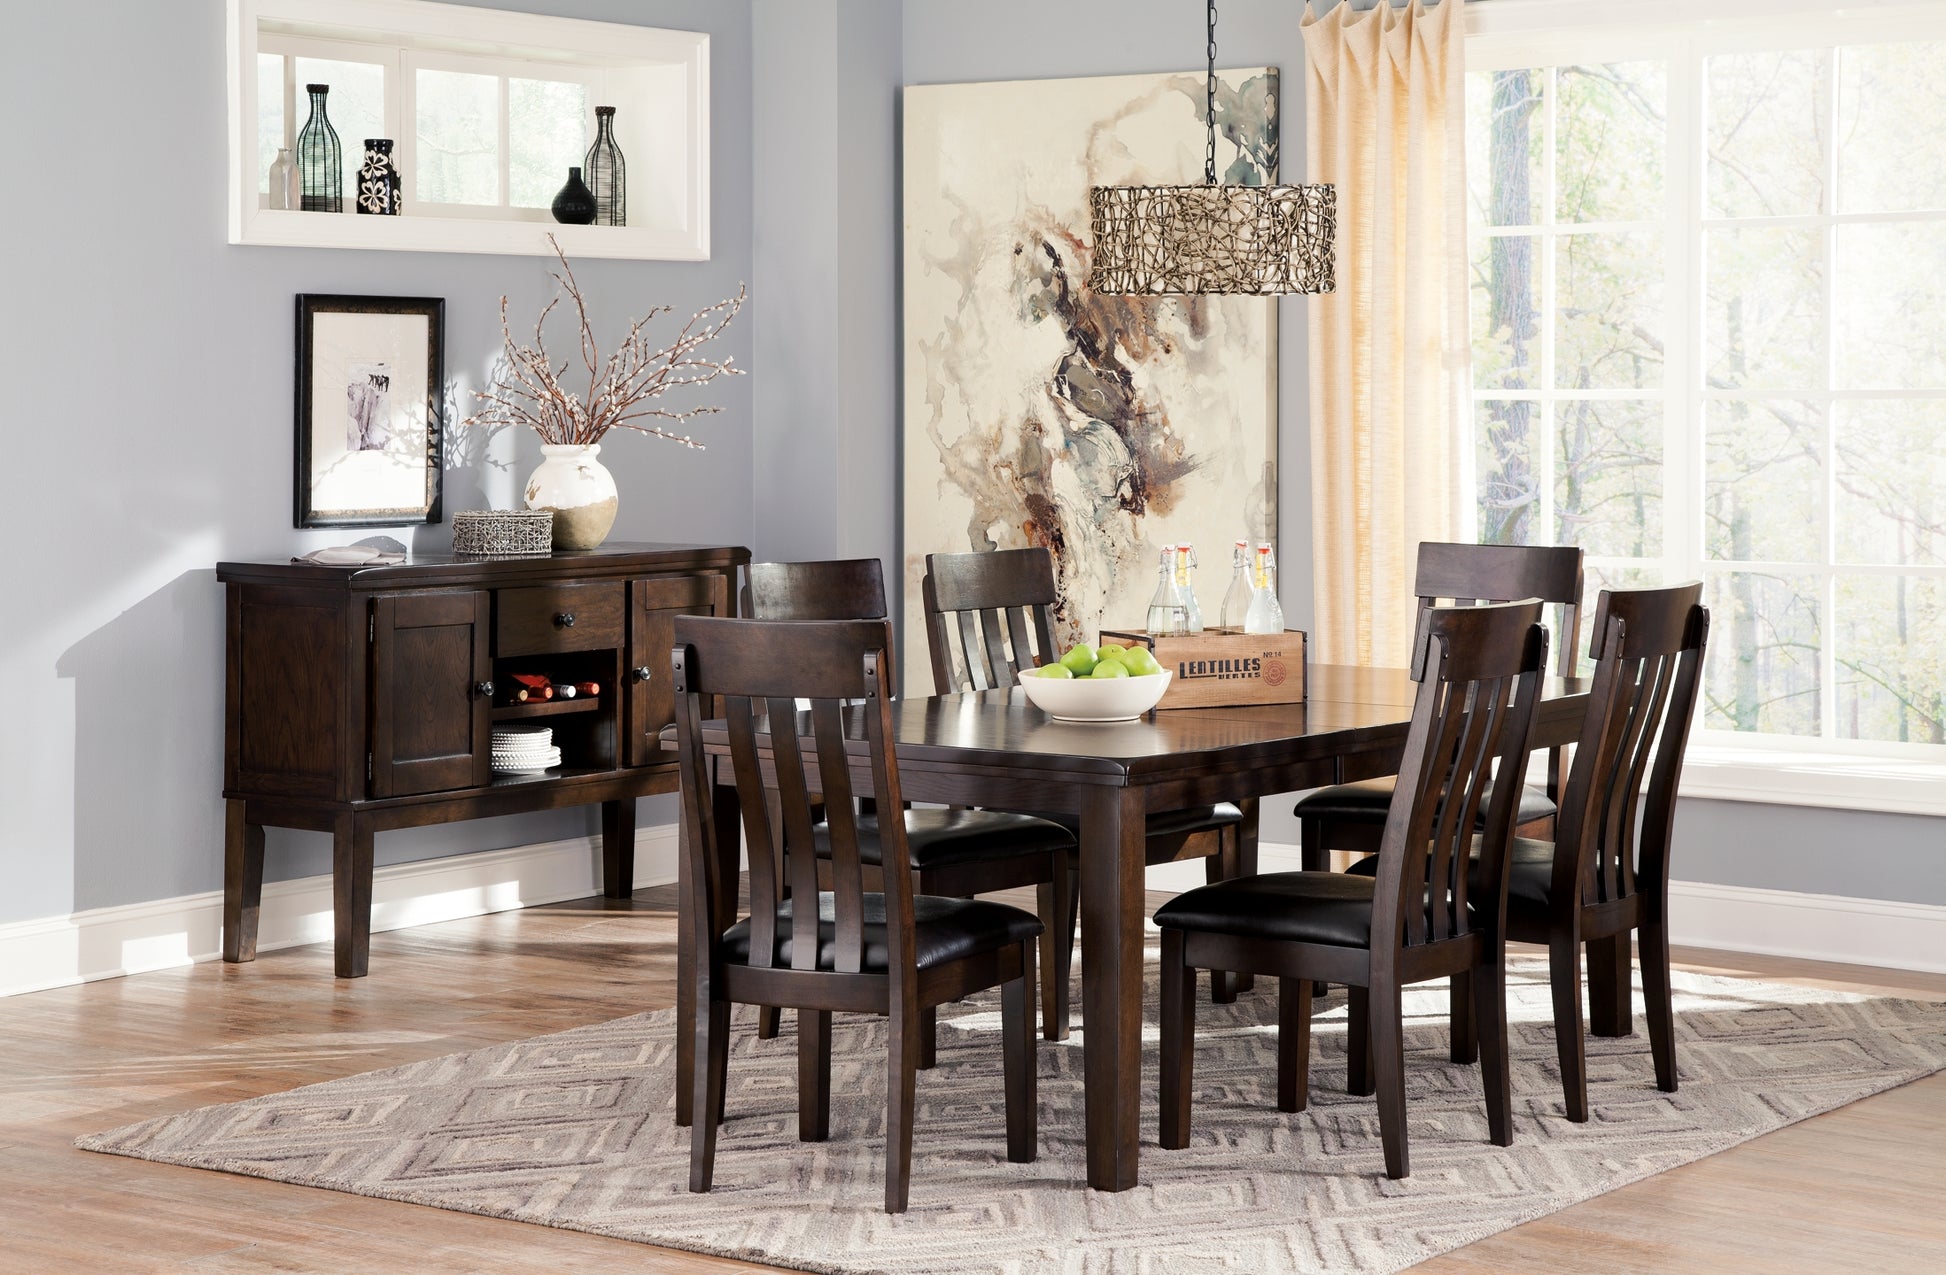 Haddigan Dining Table and 6 Chairs with Storage Wilson Furniture (OH)  in Bridgeport, Ohio. Serving Bridgeport, Yorkville, Bellaire, & Avondale